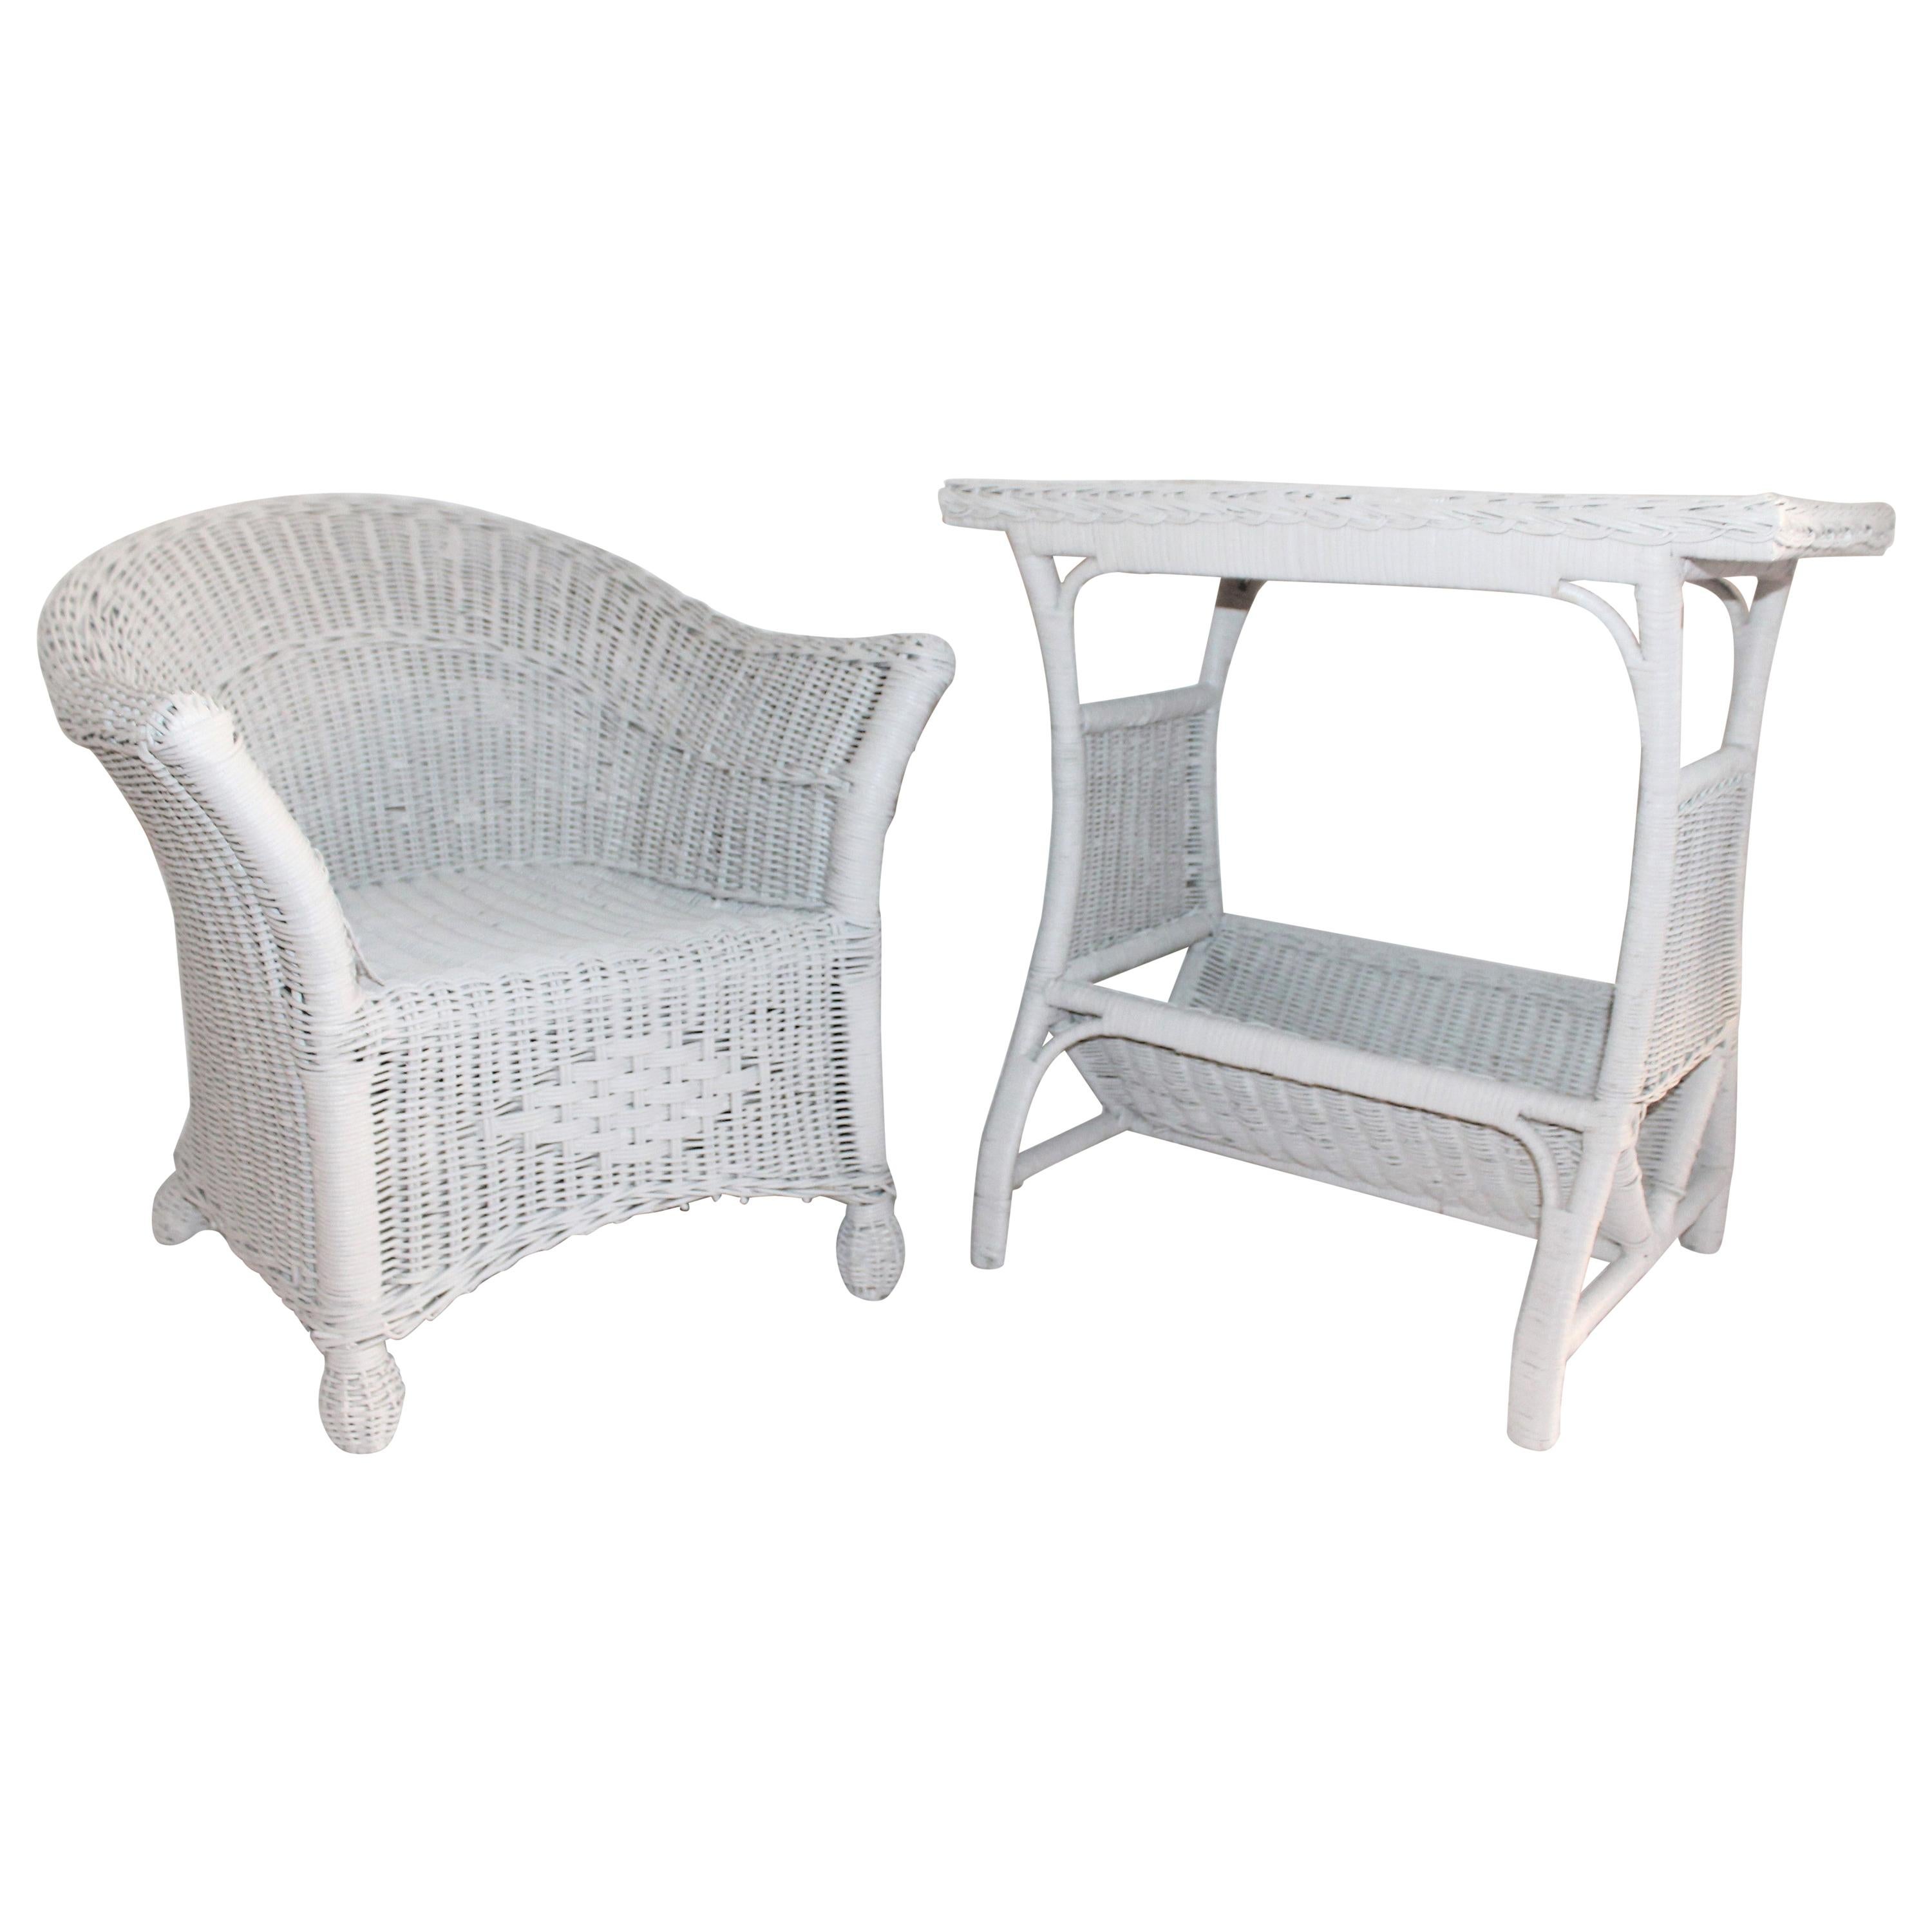 Pair of Bar Harbor Wicker Child's Chair and Side Table